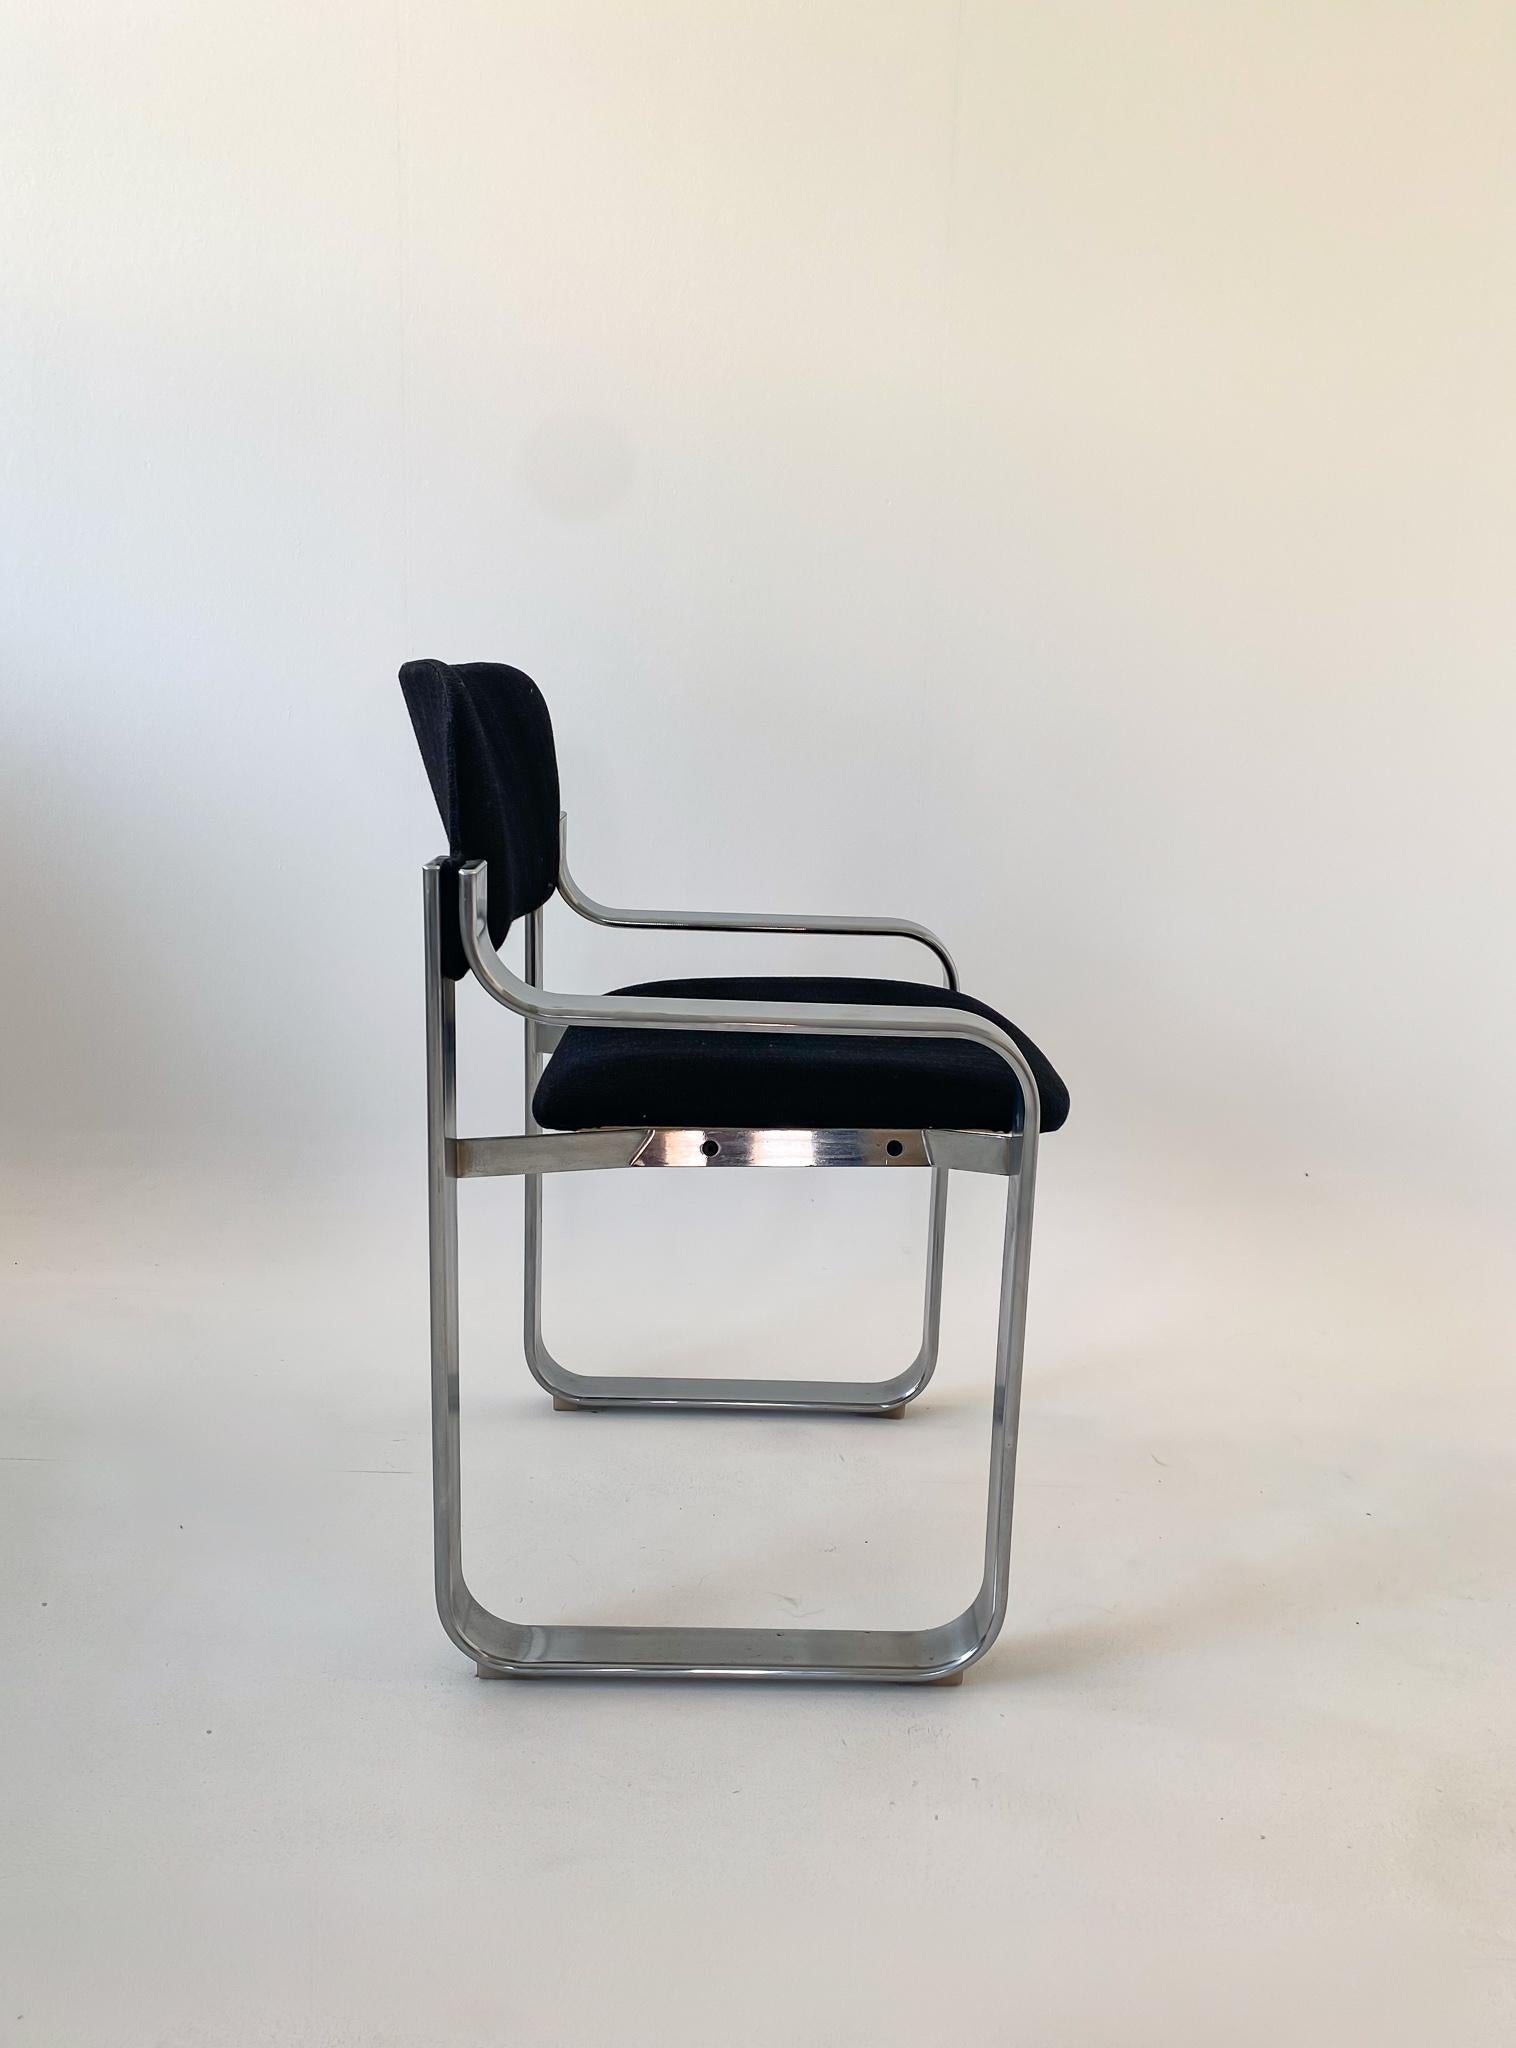 Polished Mid-Century Modern Black Metal Armchair by Eero Aarnio for Mobile Italia, 1970s For Sale